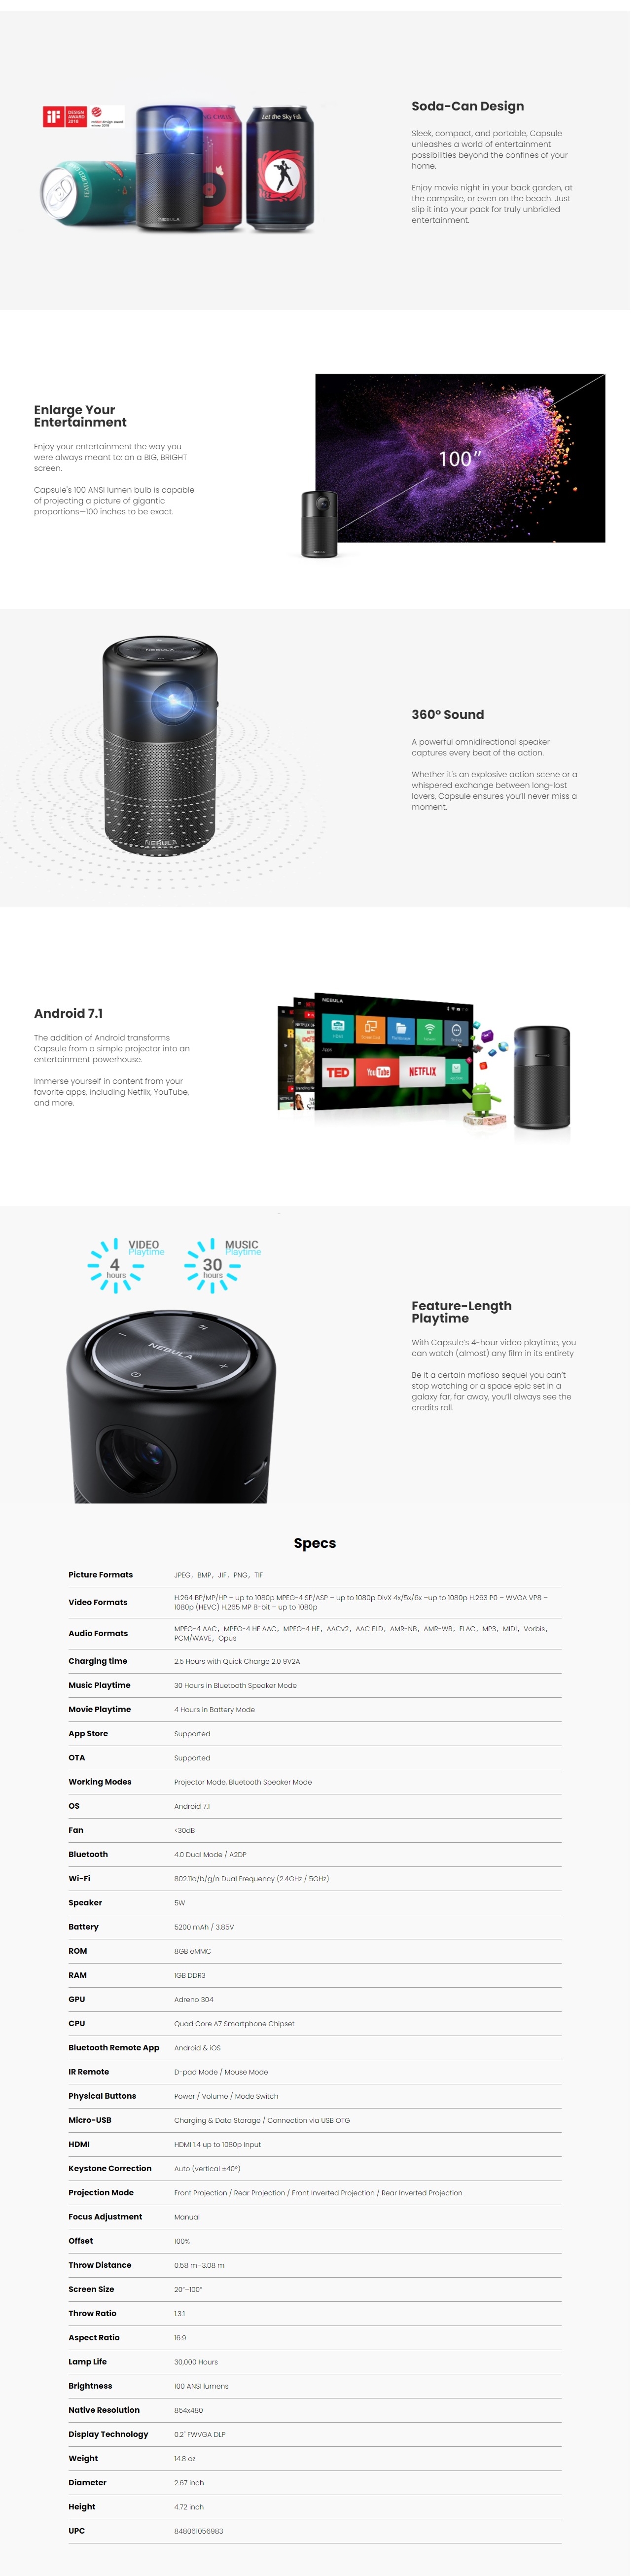 A large marketing image providing additional information about the product Nebula Capsule Mini Portable Projector - Black - Additional alt info not provided